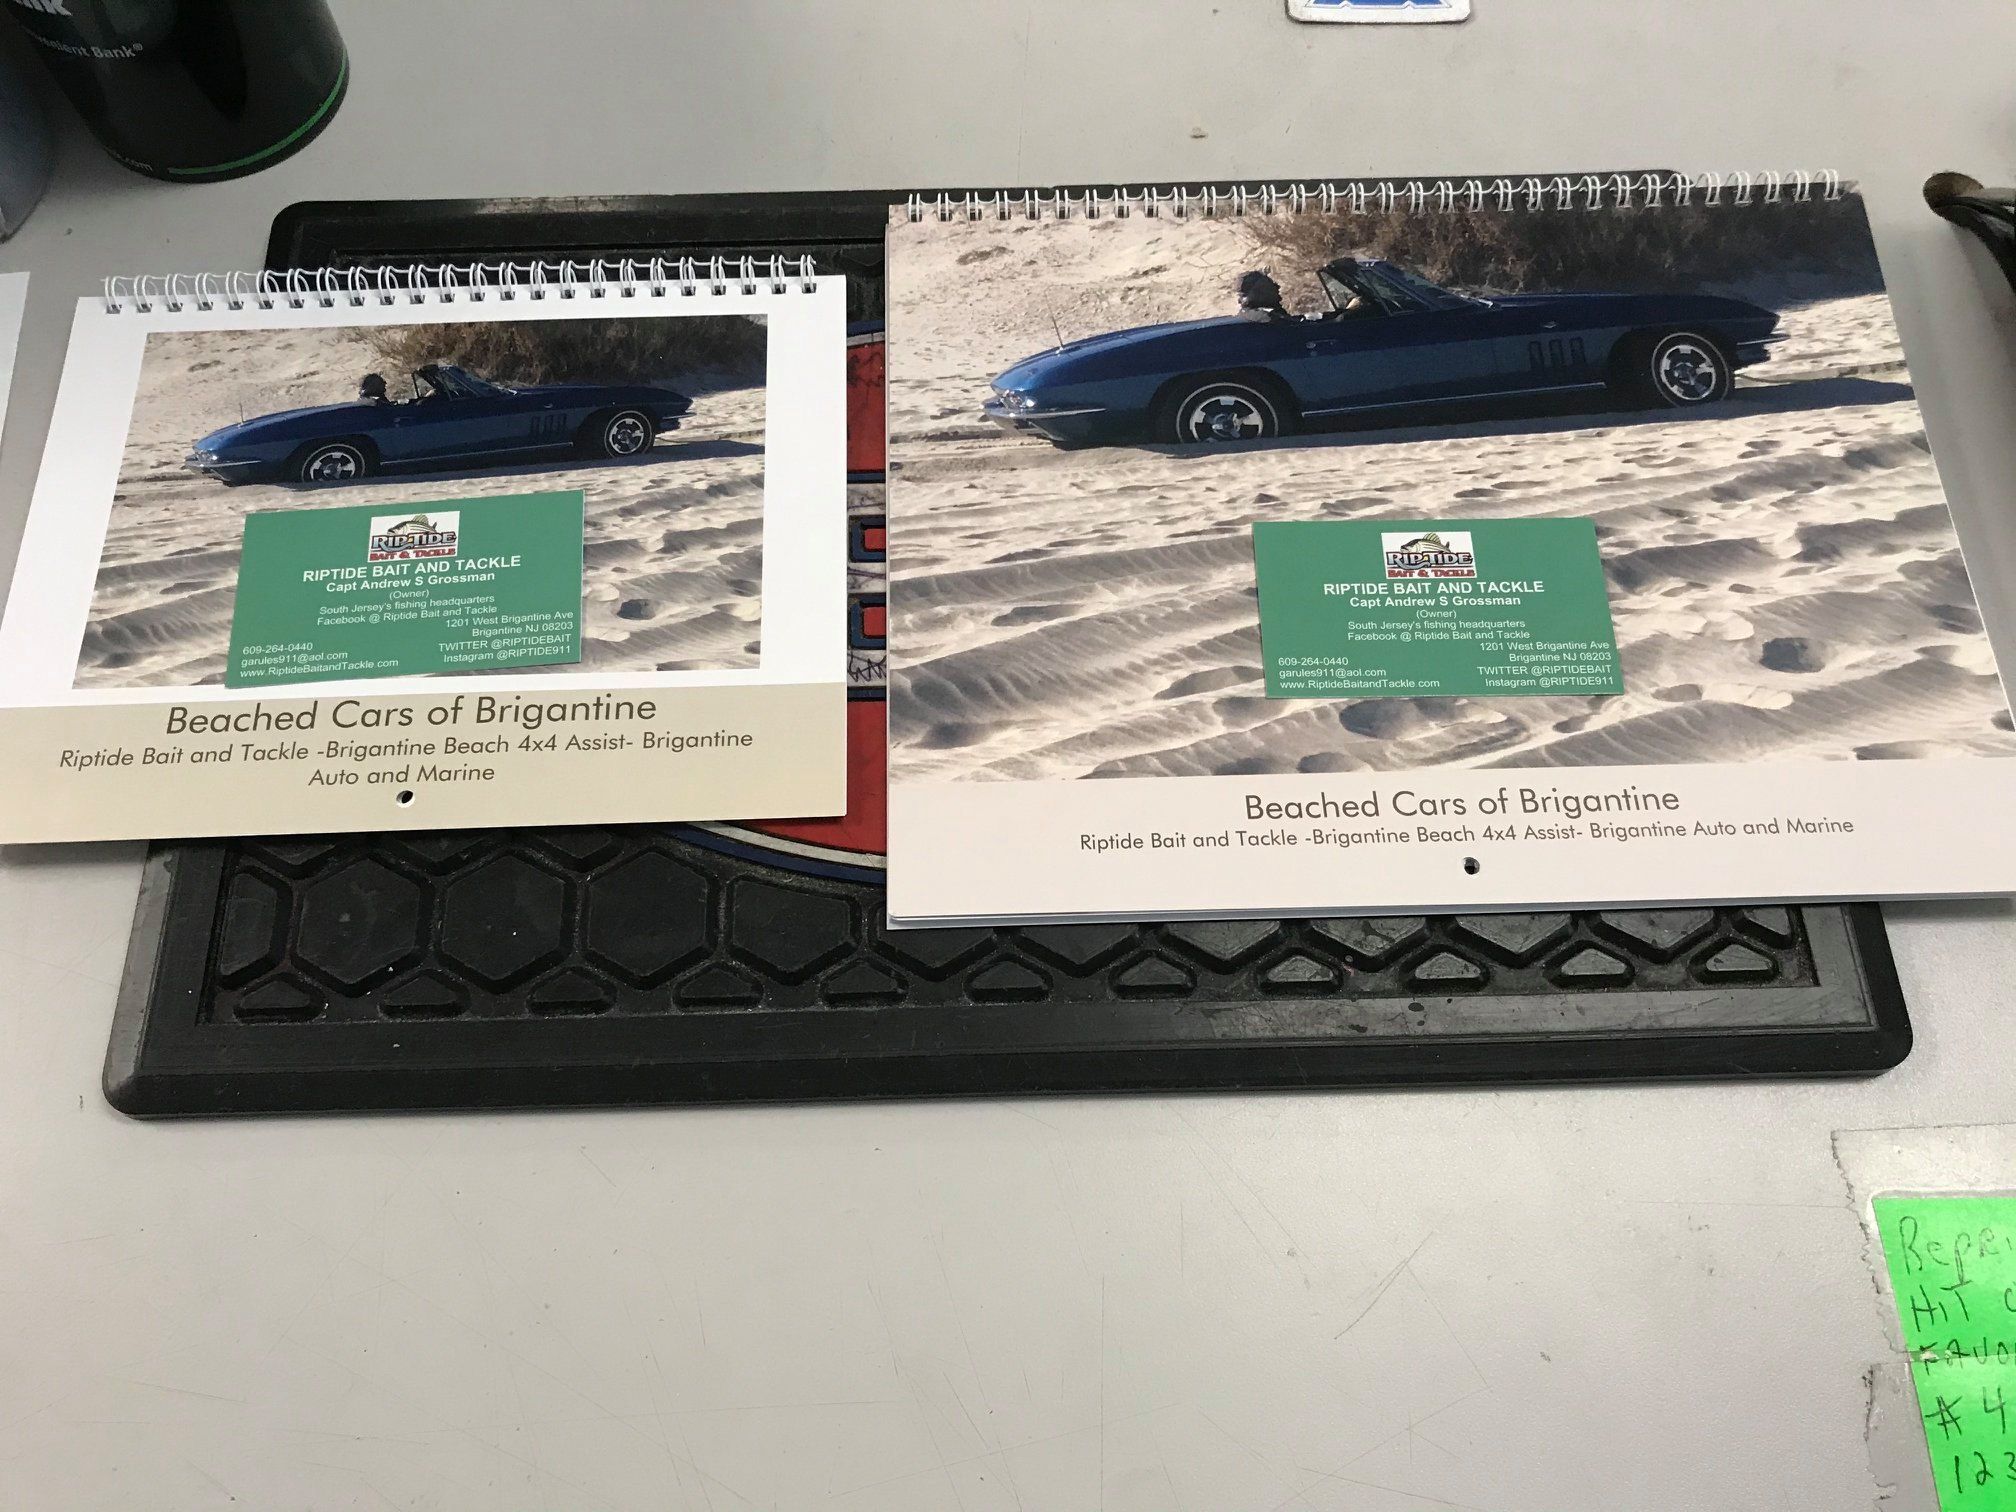 New Calendar Features Cars Stuck in Sand